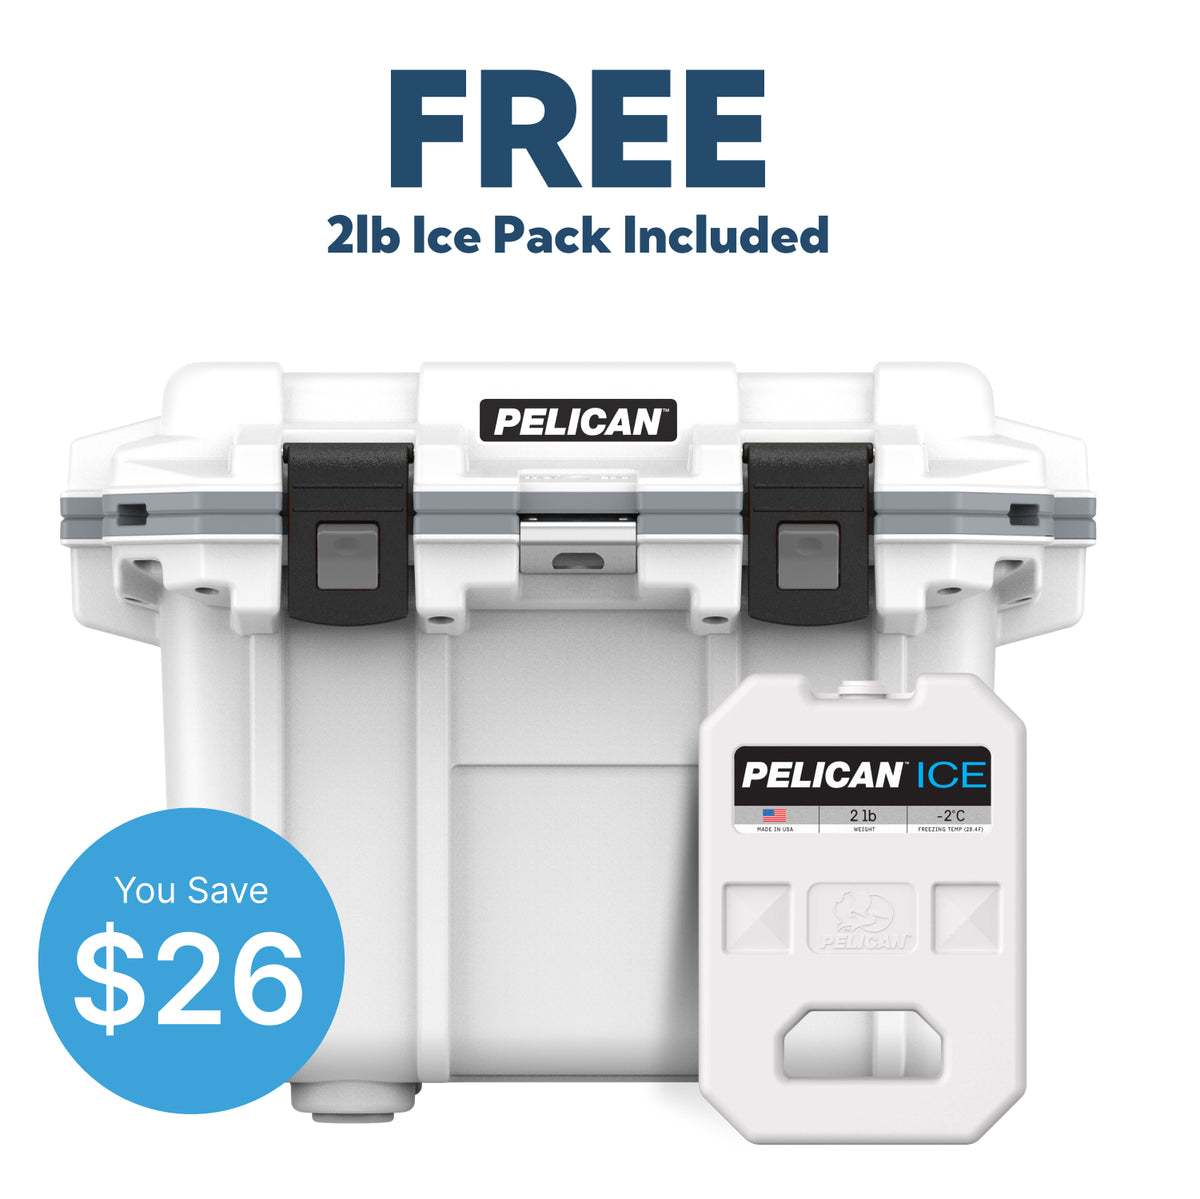 White / Grey Pelican Cooler and 2lb Free Pelican Ice Pack